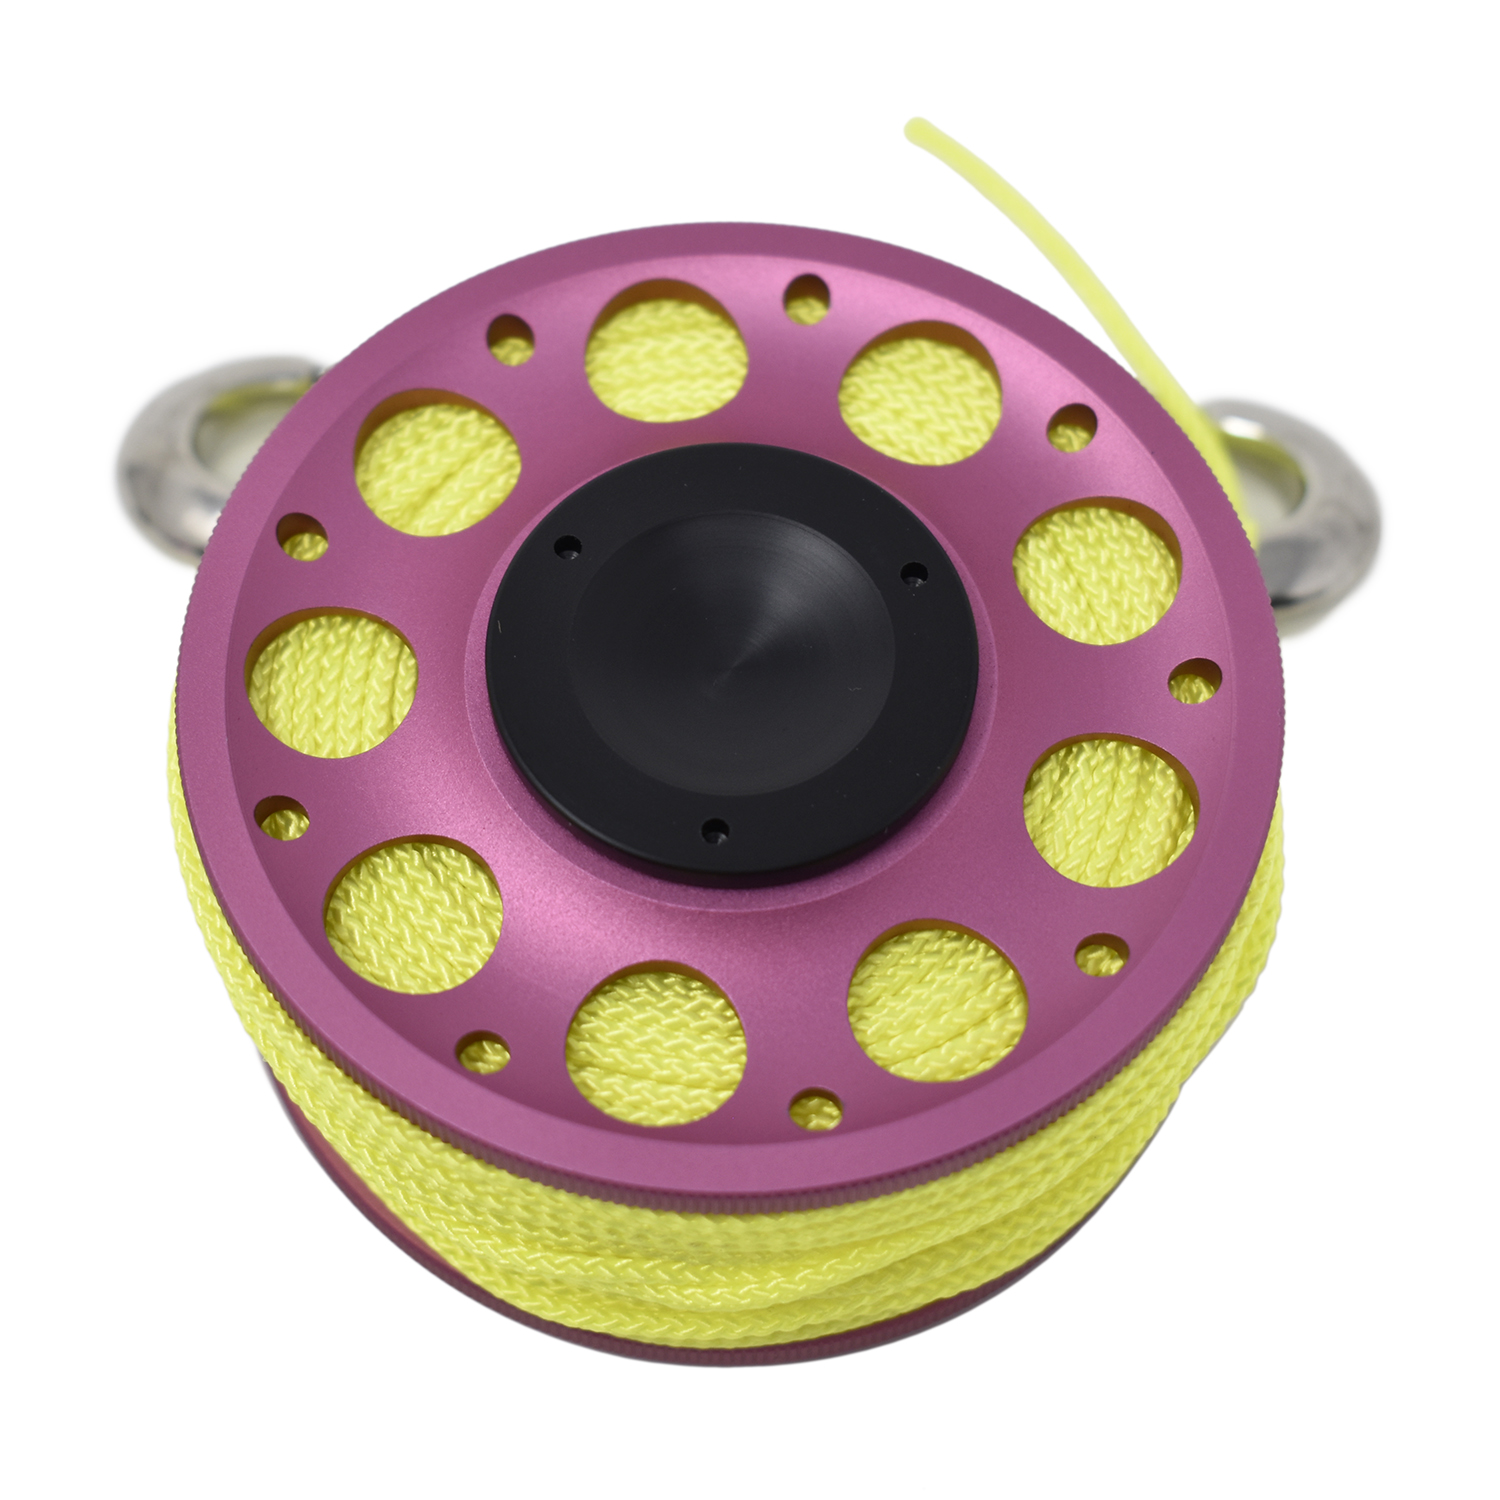 Aluminum Finger Spool 100ft Dive Reel w/ Spinning Holder, Pink/Yellow - image 2 of 4